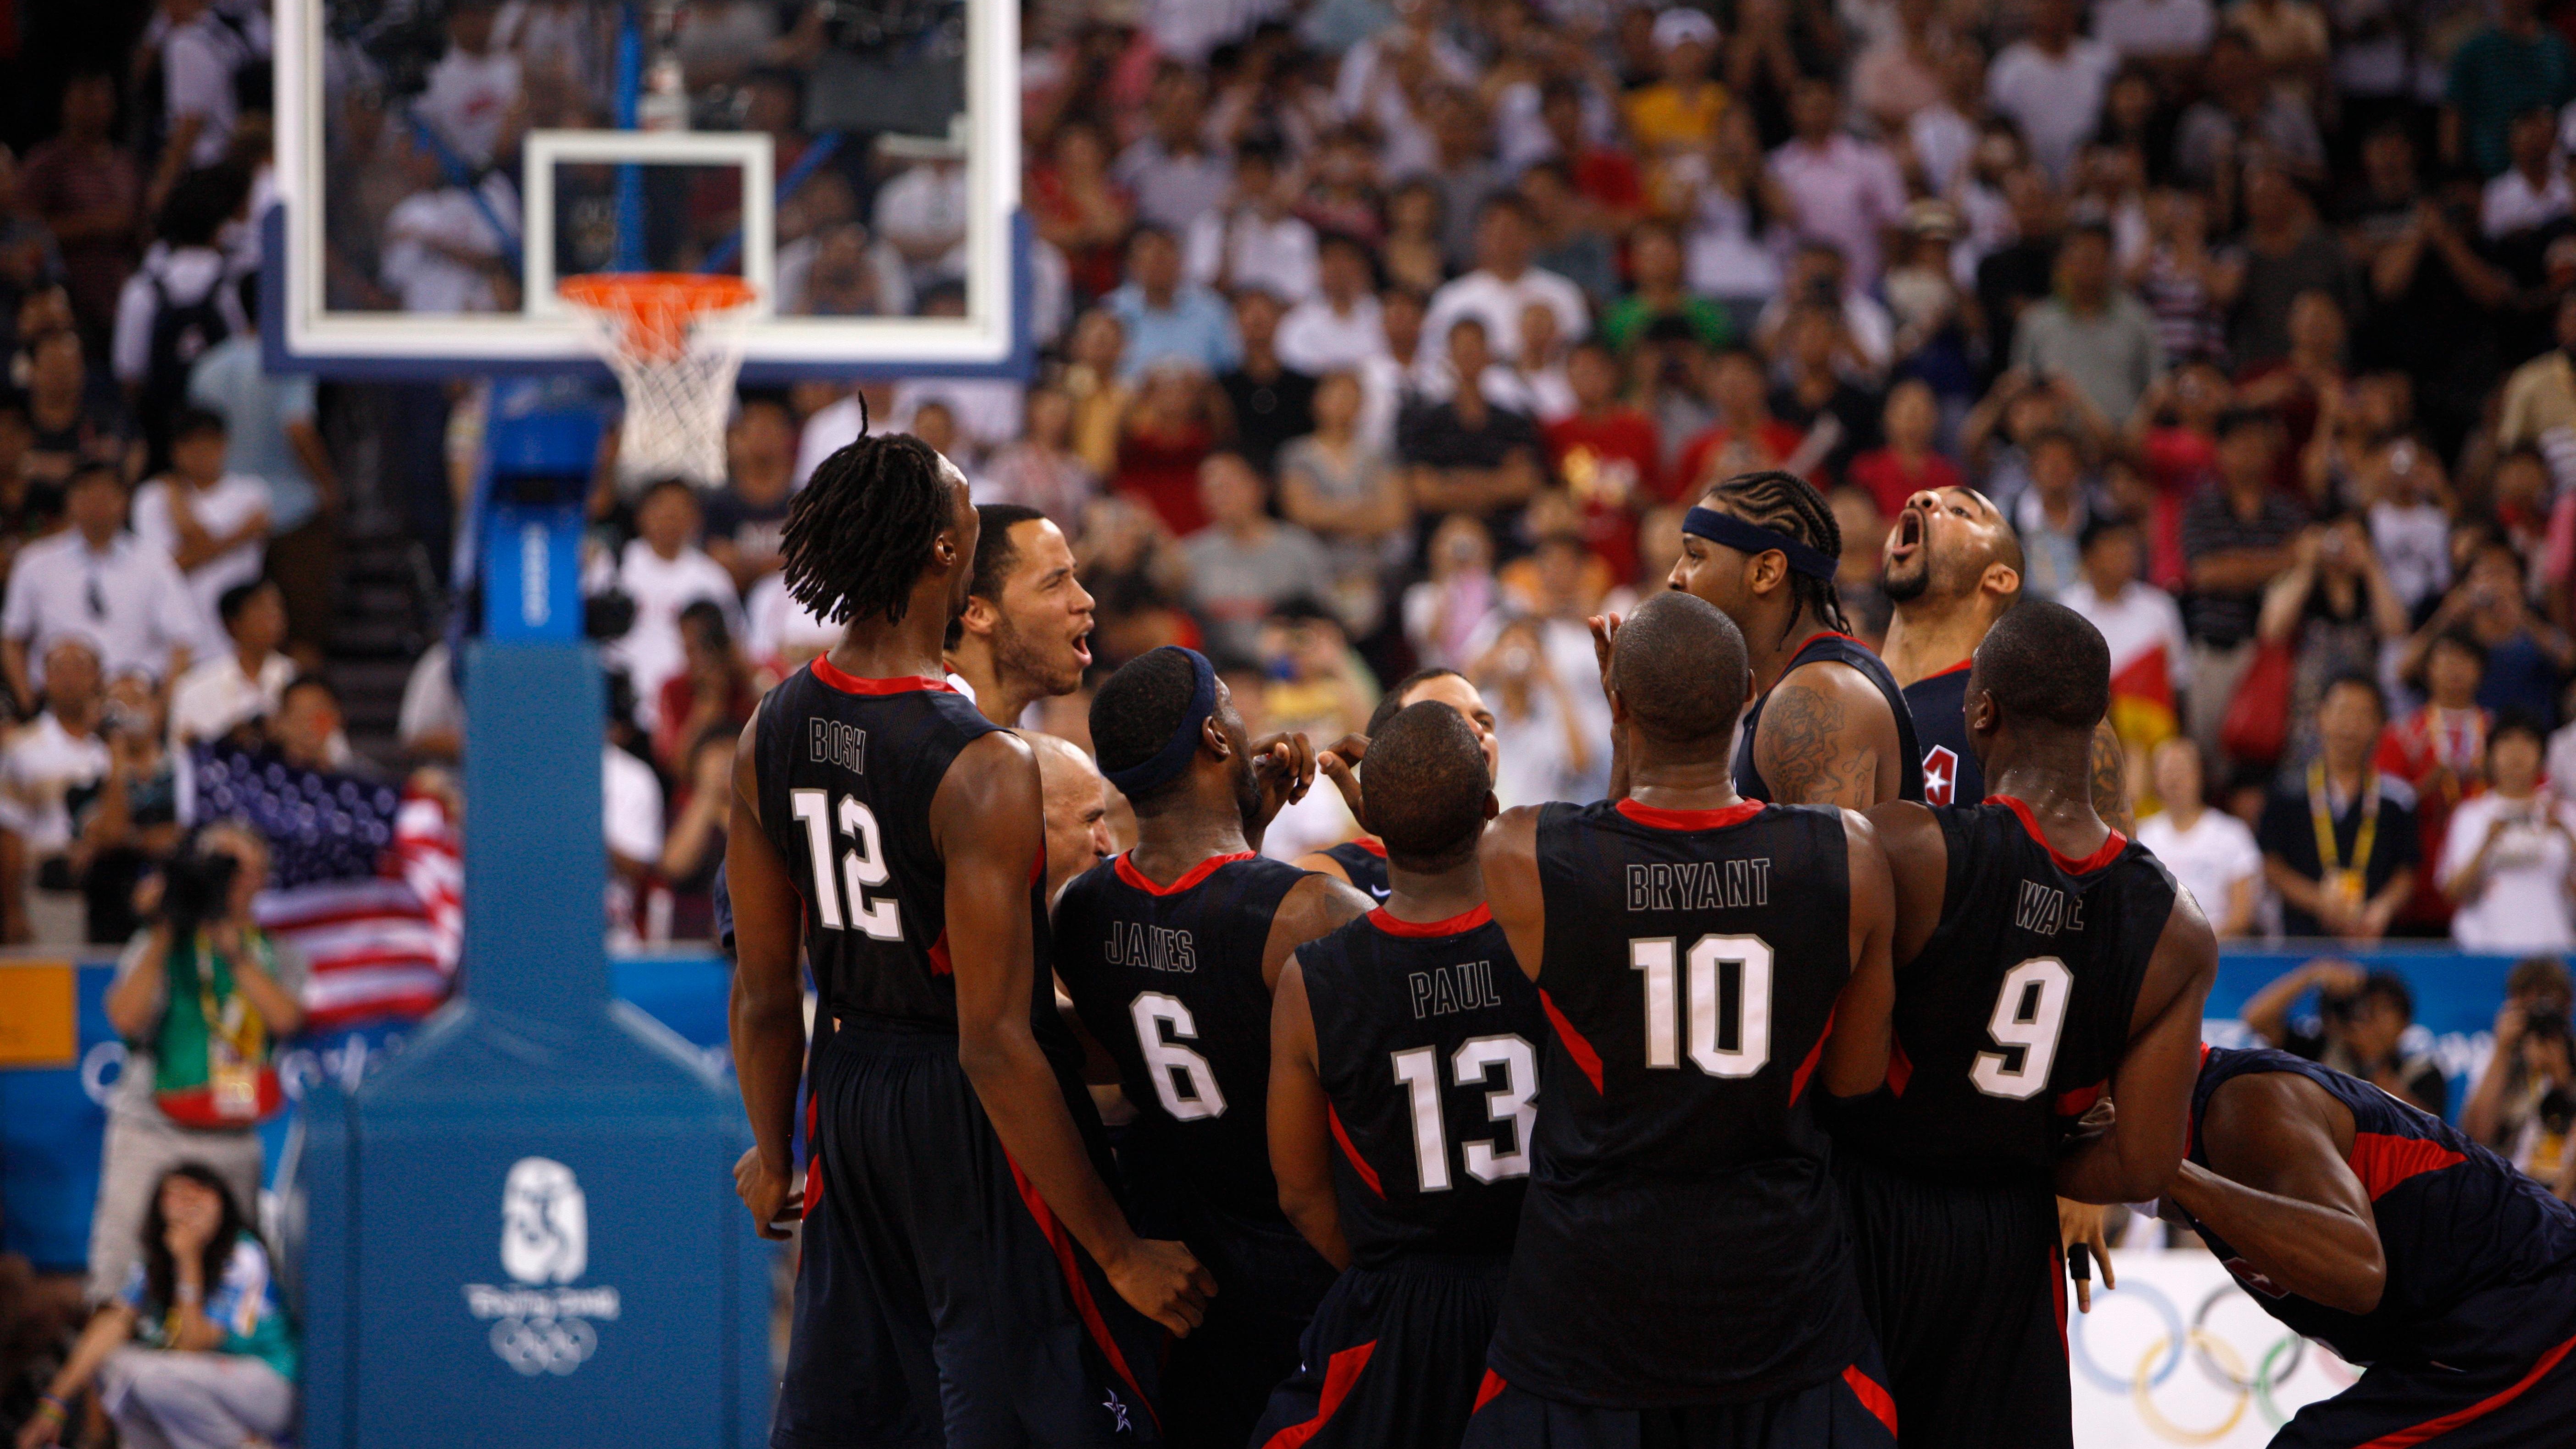 5 things to know about 'The Redeem Team' from 2008 Olympics – NBC